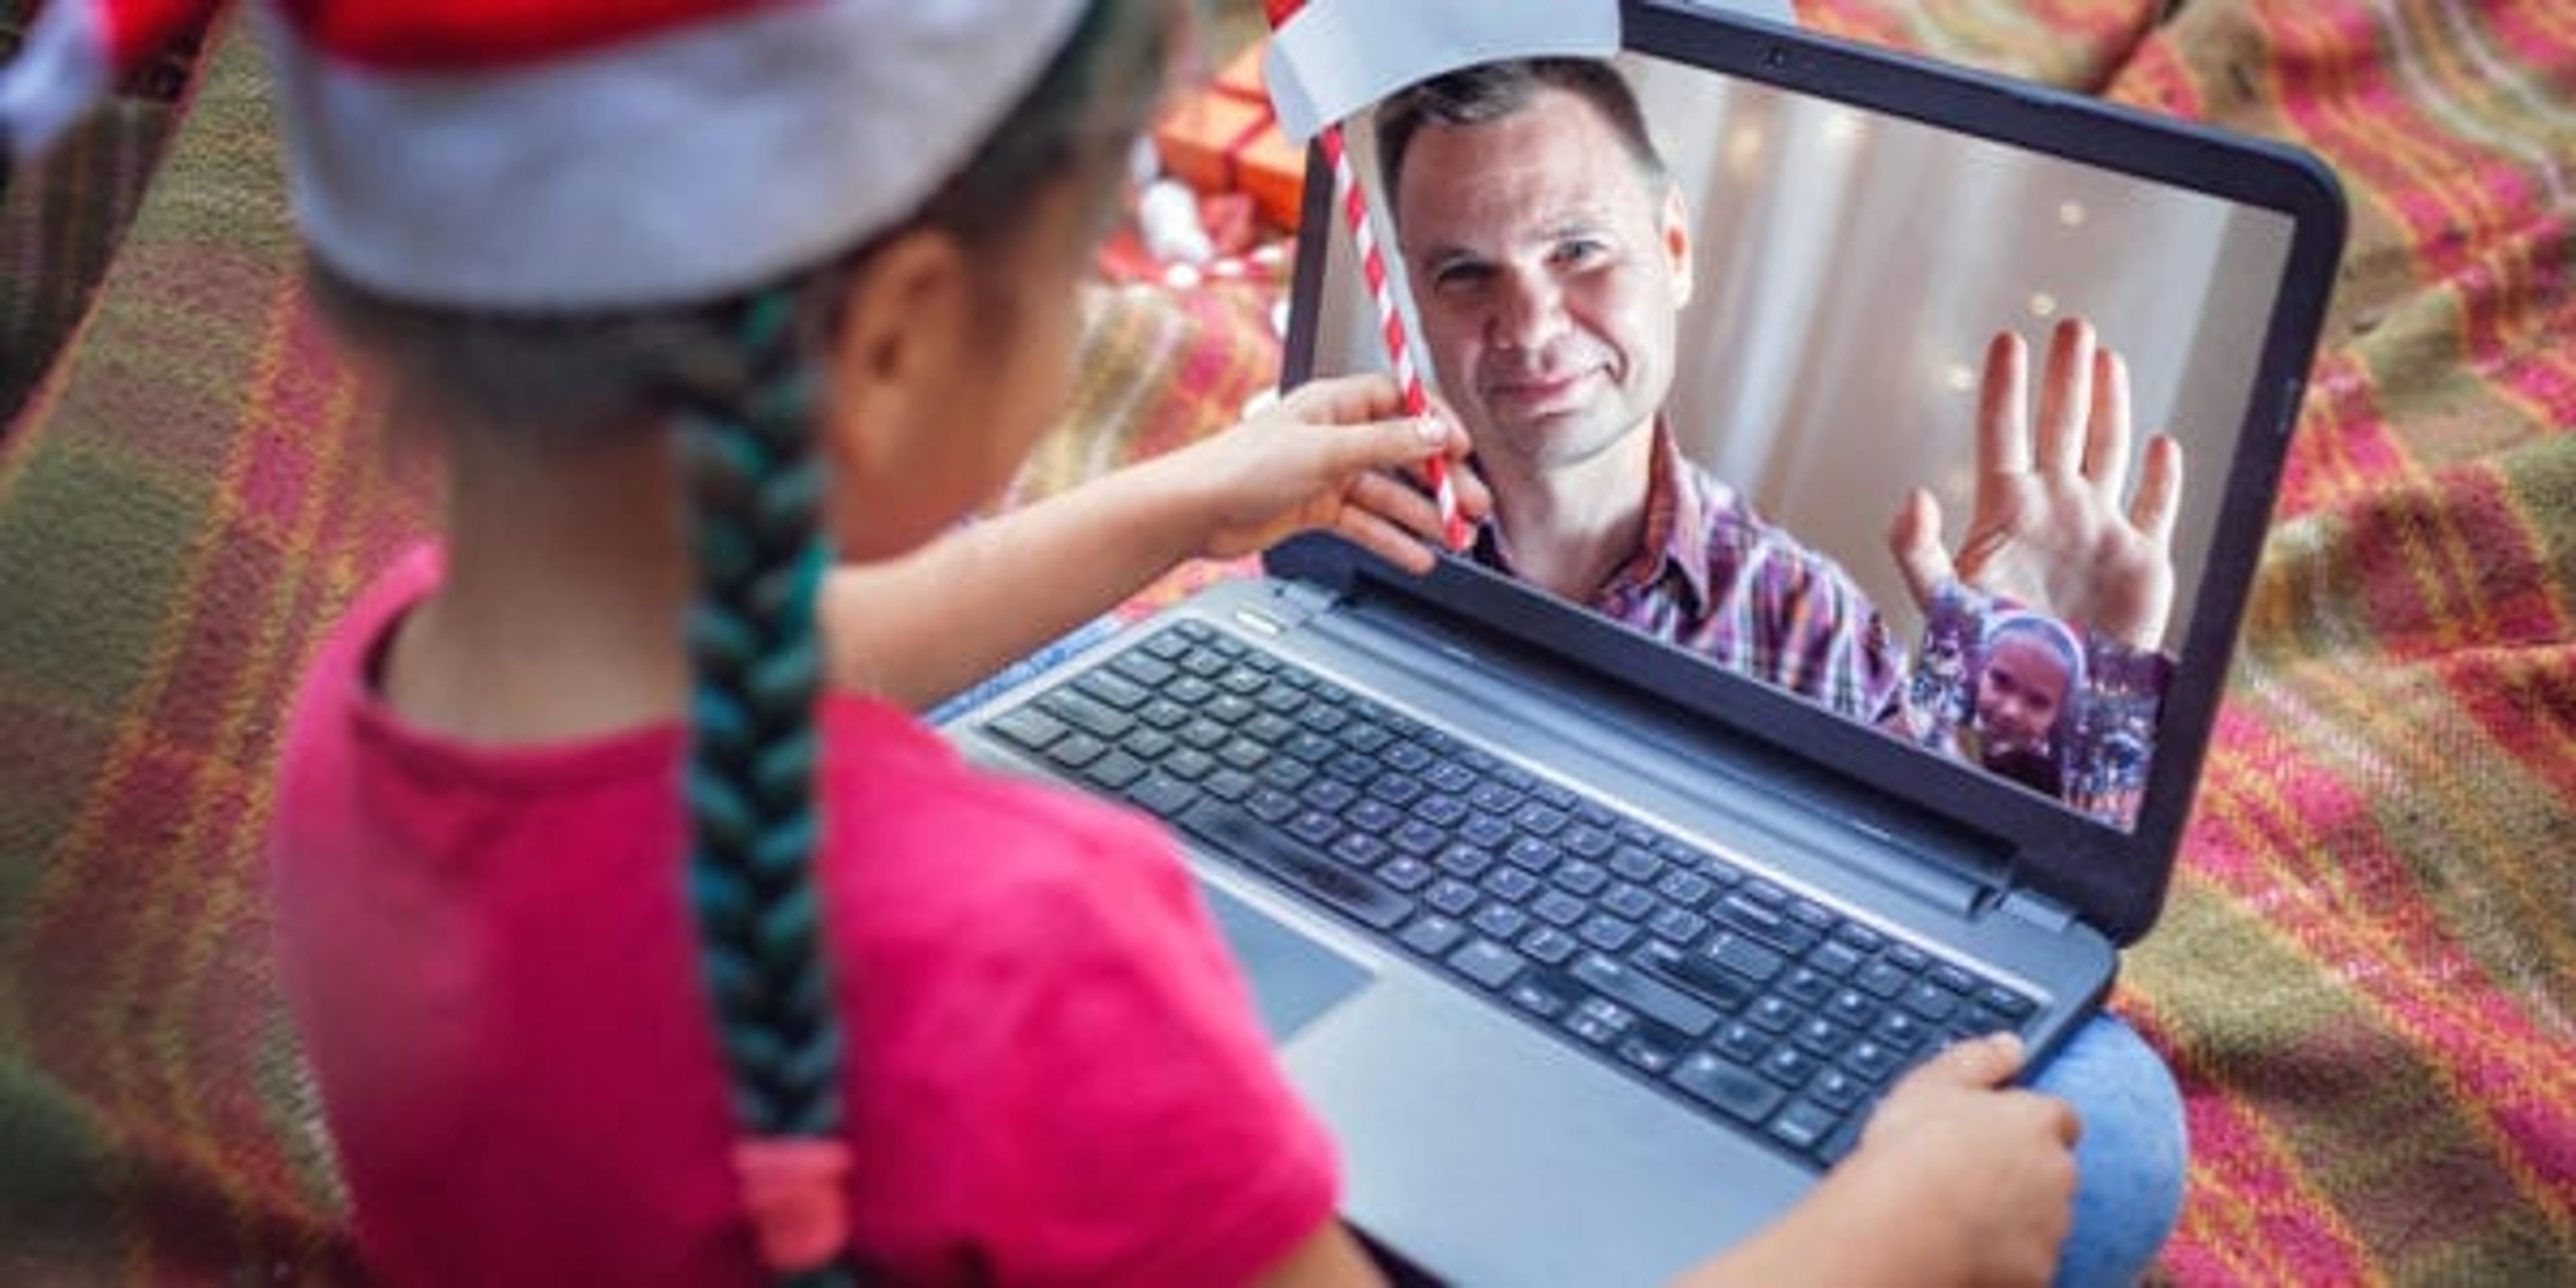 New normal online Christmas celebration. Cute sibling using laptop and festive fun props to celebrate Christmas with father via video chat, happy holidays, outdoor